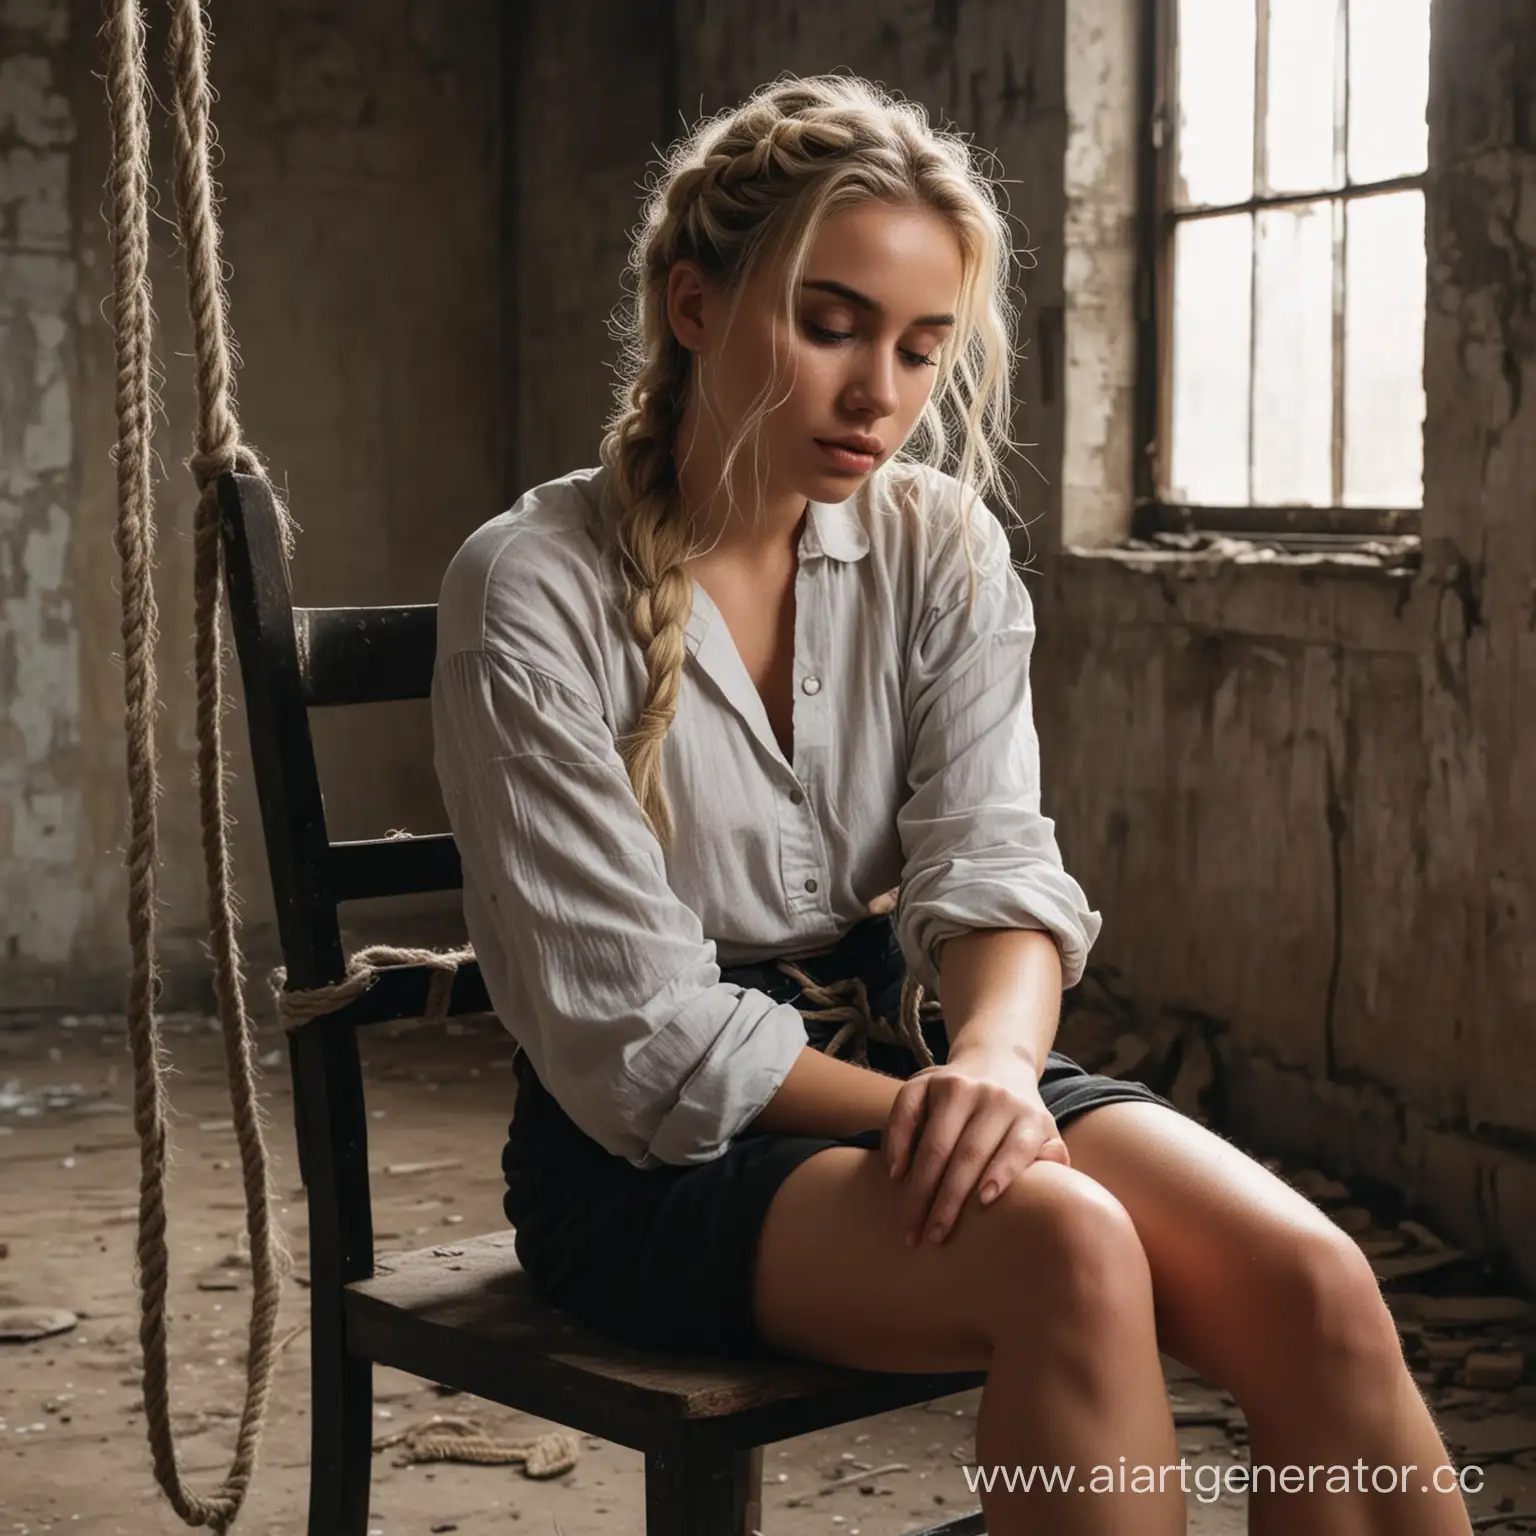 a beautiful girl with blonde hair tied with ropes, sitting on a chair kidnapped in an abandoned building, she is hugged and rescued by a guy with dark curly hair